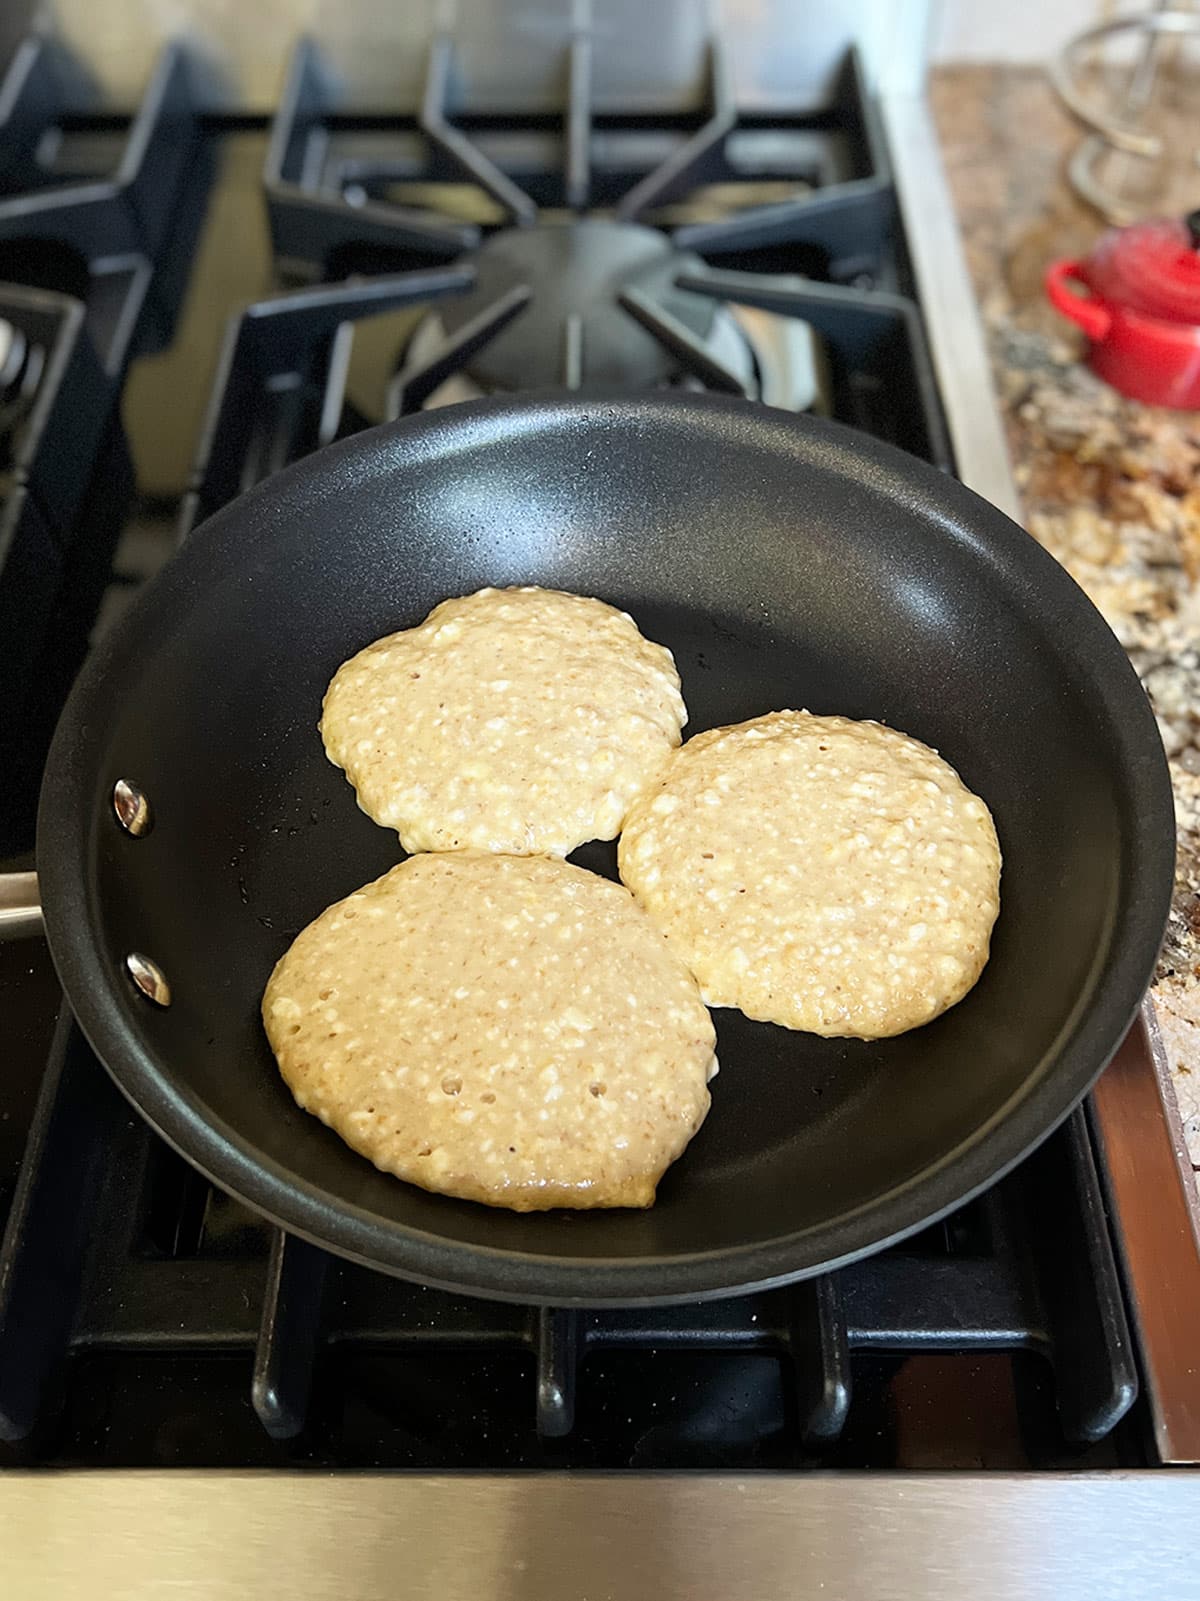 Three cheese latkes in a pan cooking with the uncooked side facing up.